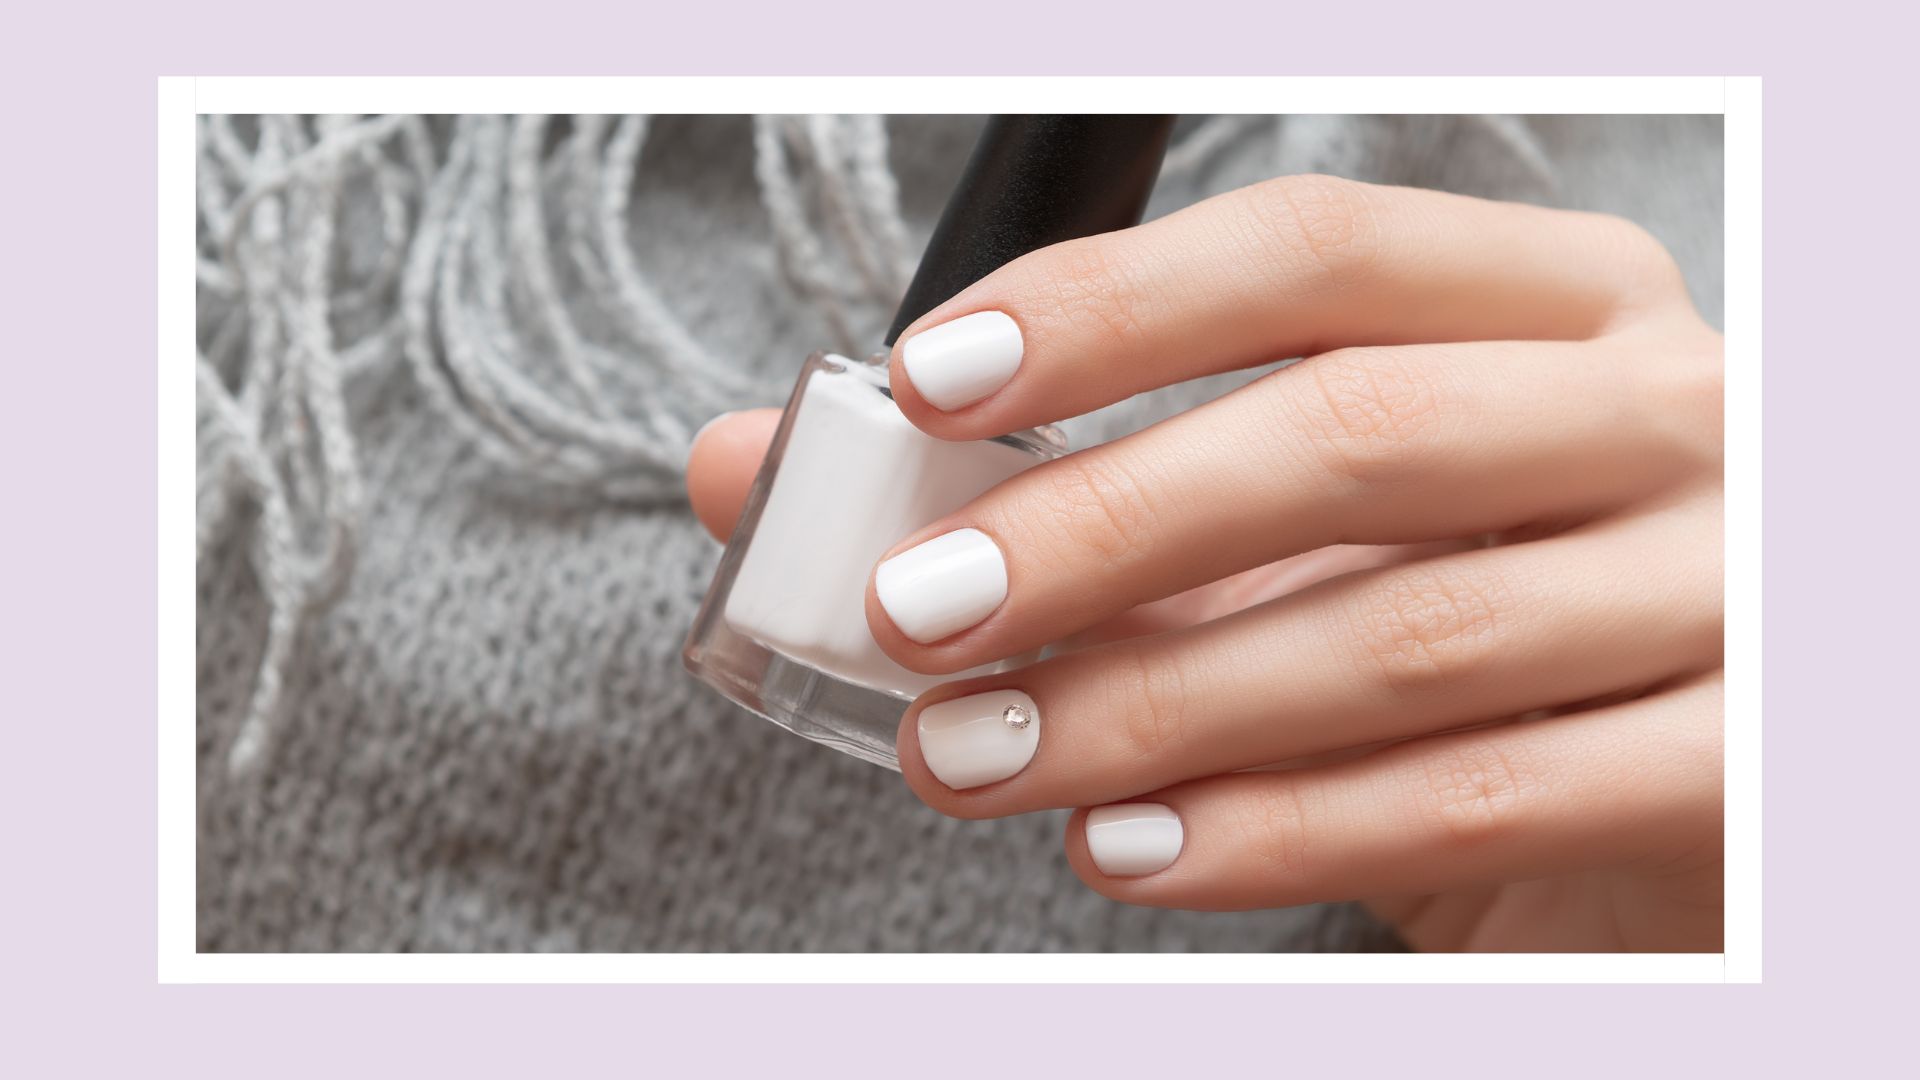 What Your Nail Color Says About Your Health | Reader's Digest